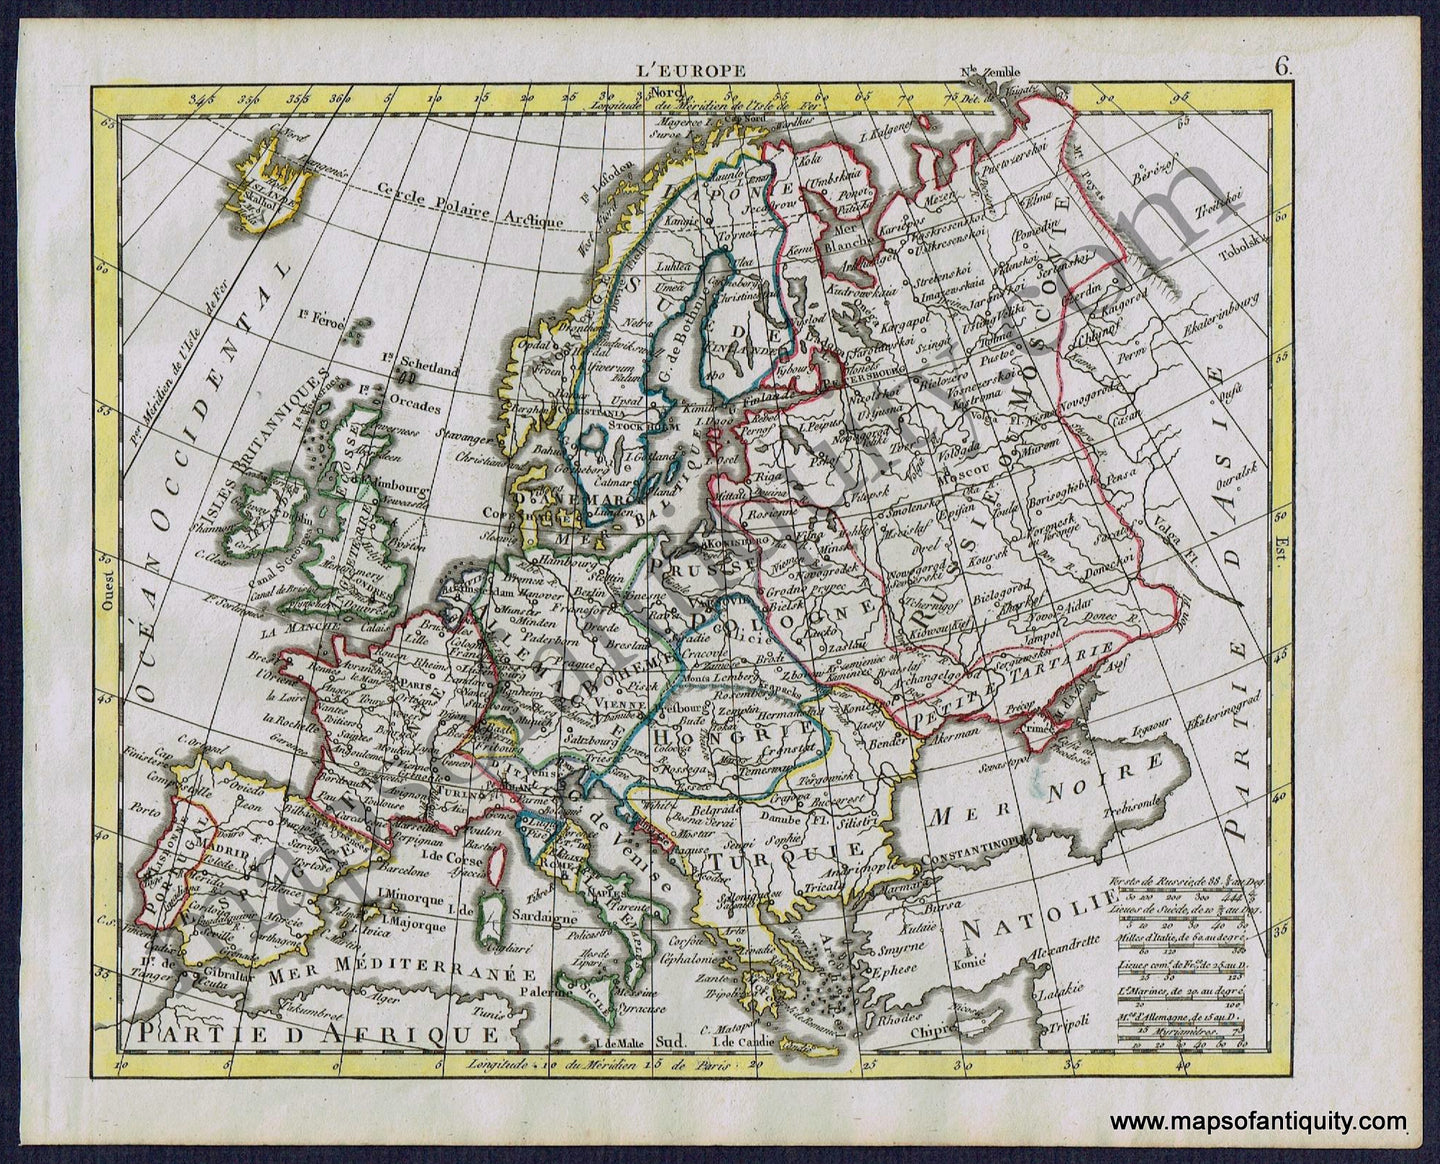 Antique-Map-L'Europe-Europe-Herrison-French-1806-1800s-Early-19th-Century-Maps-of-Antiquity